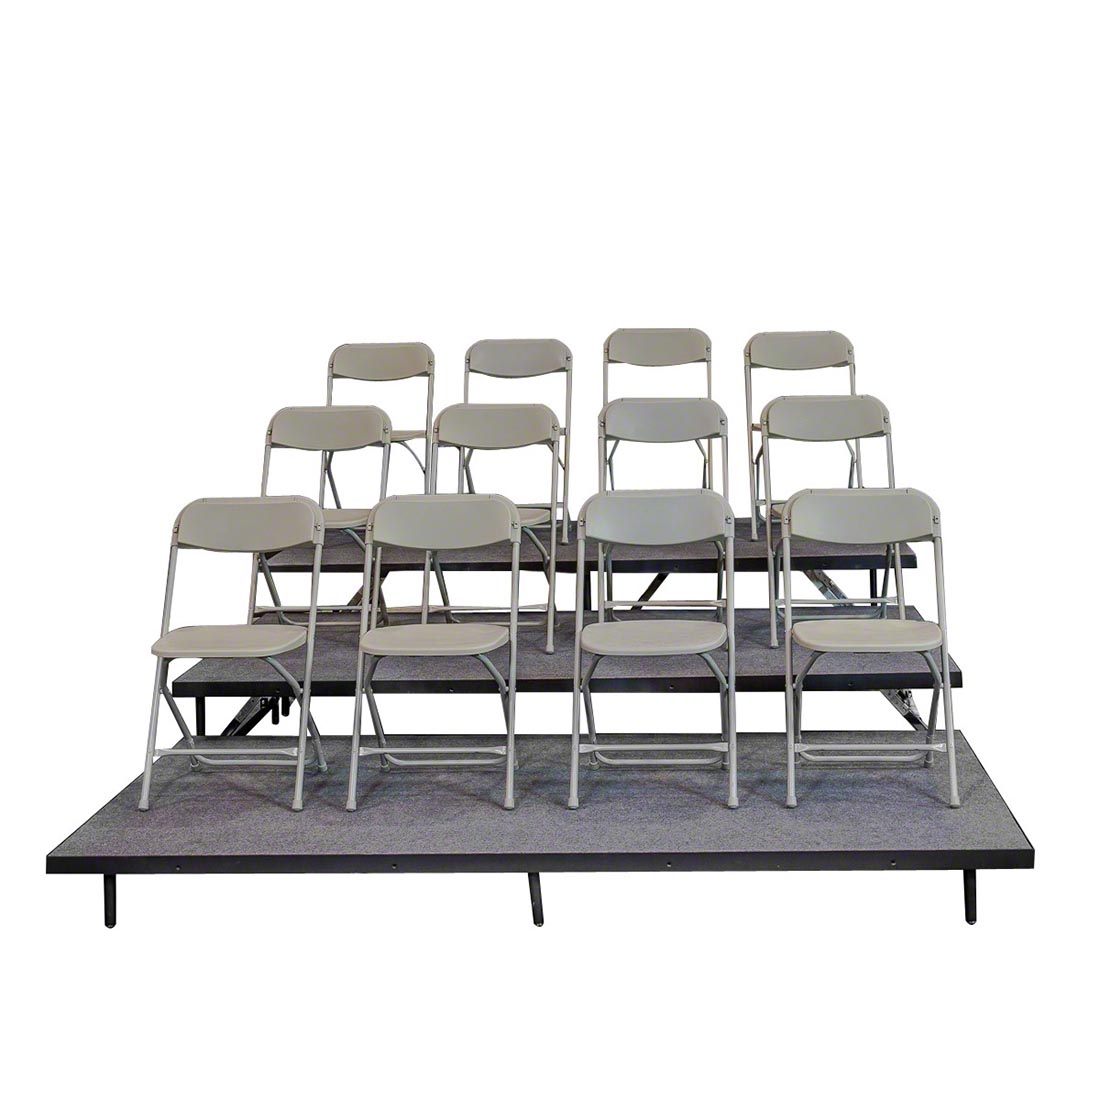 https://www.stagedrop.com/resize/images/staging-101/S3SSC-chairs.jpg?bw=1000&w=1000&bh=1000&h=1000